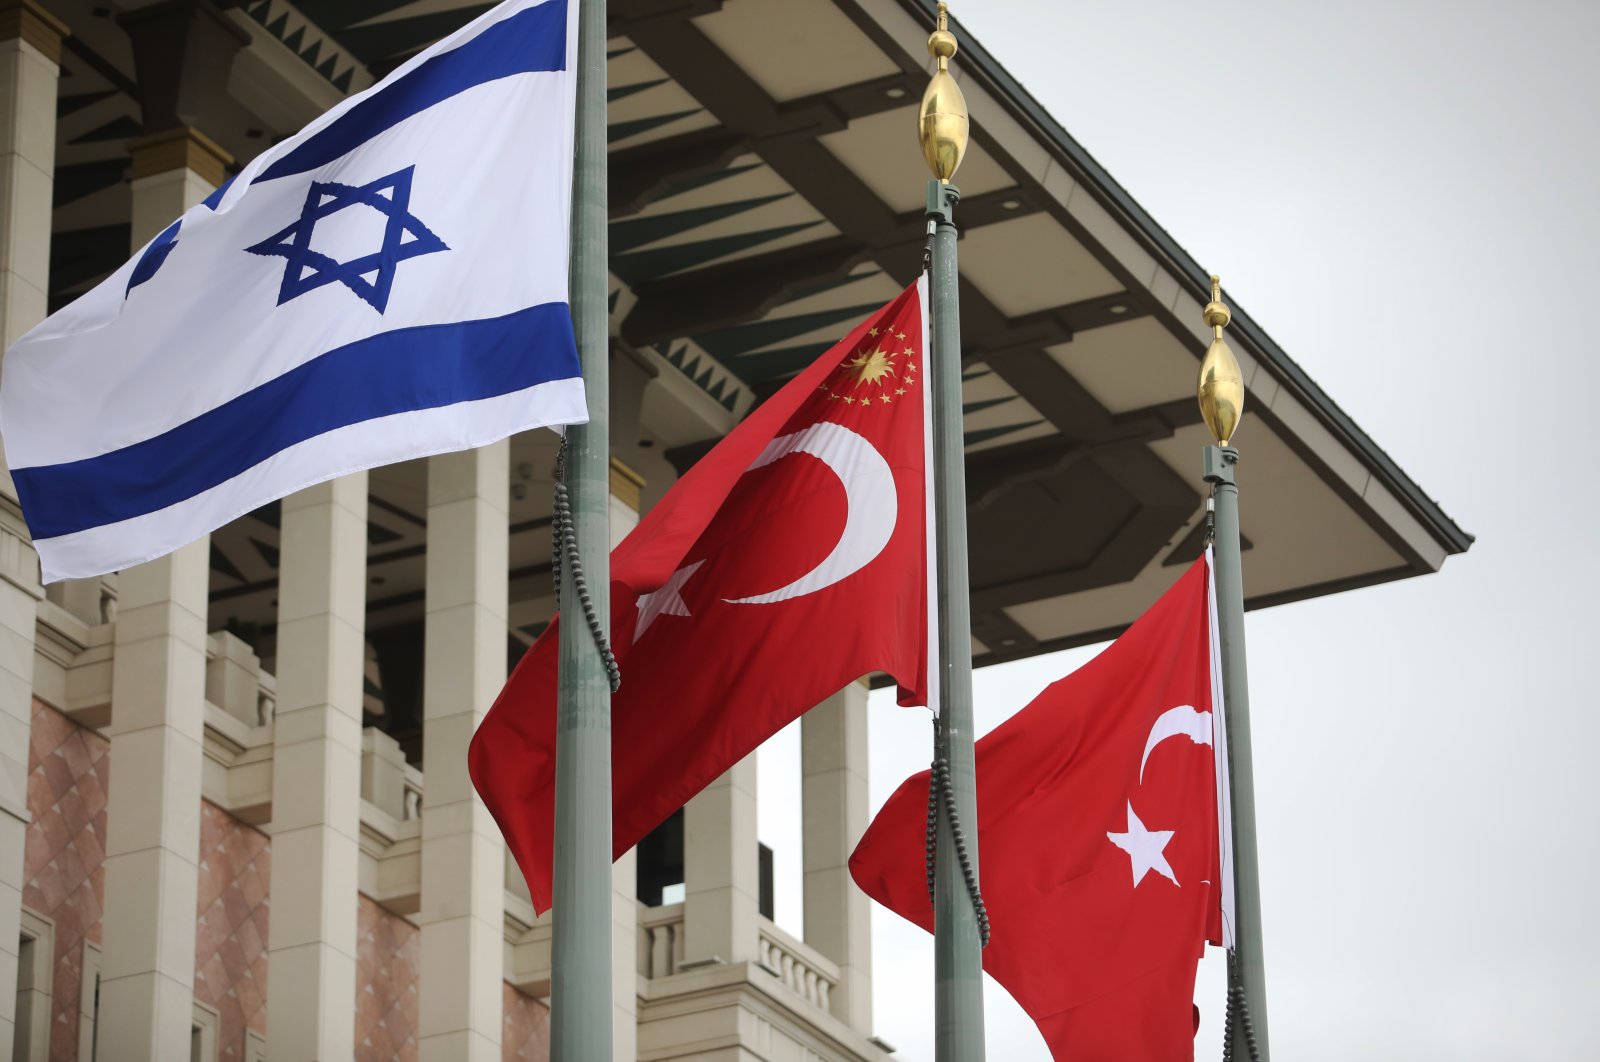 The Turkish and Israeli flags wave during a ceremony where Israeli President Isaac Herzog was welcomed with an official ceremony by President Recep Tayyip Erdoğan in capital Ankara, Türkiye, March 9, 2022. (Getty Images Photo)